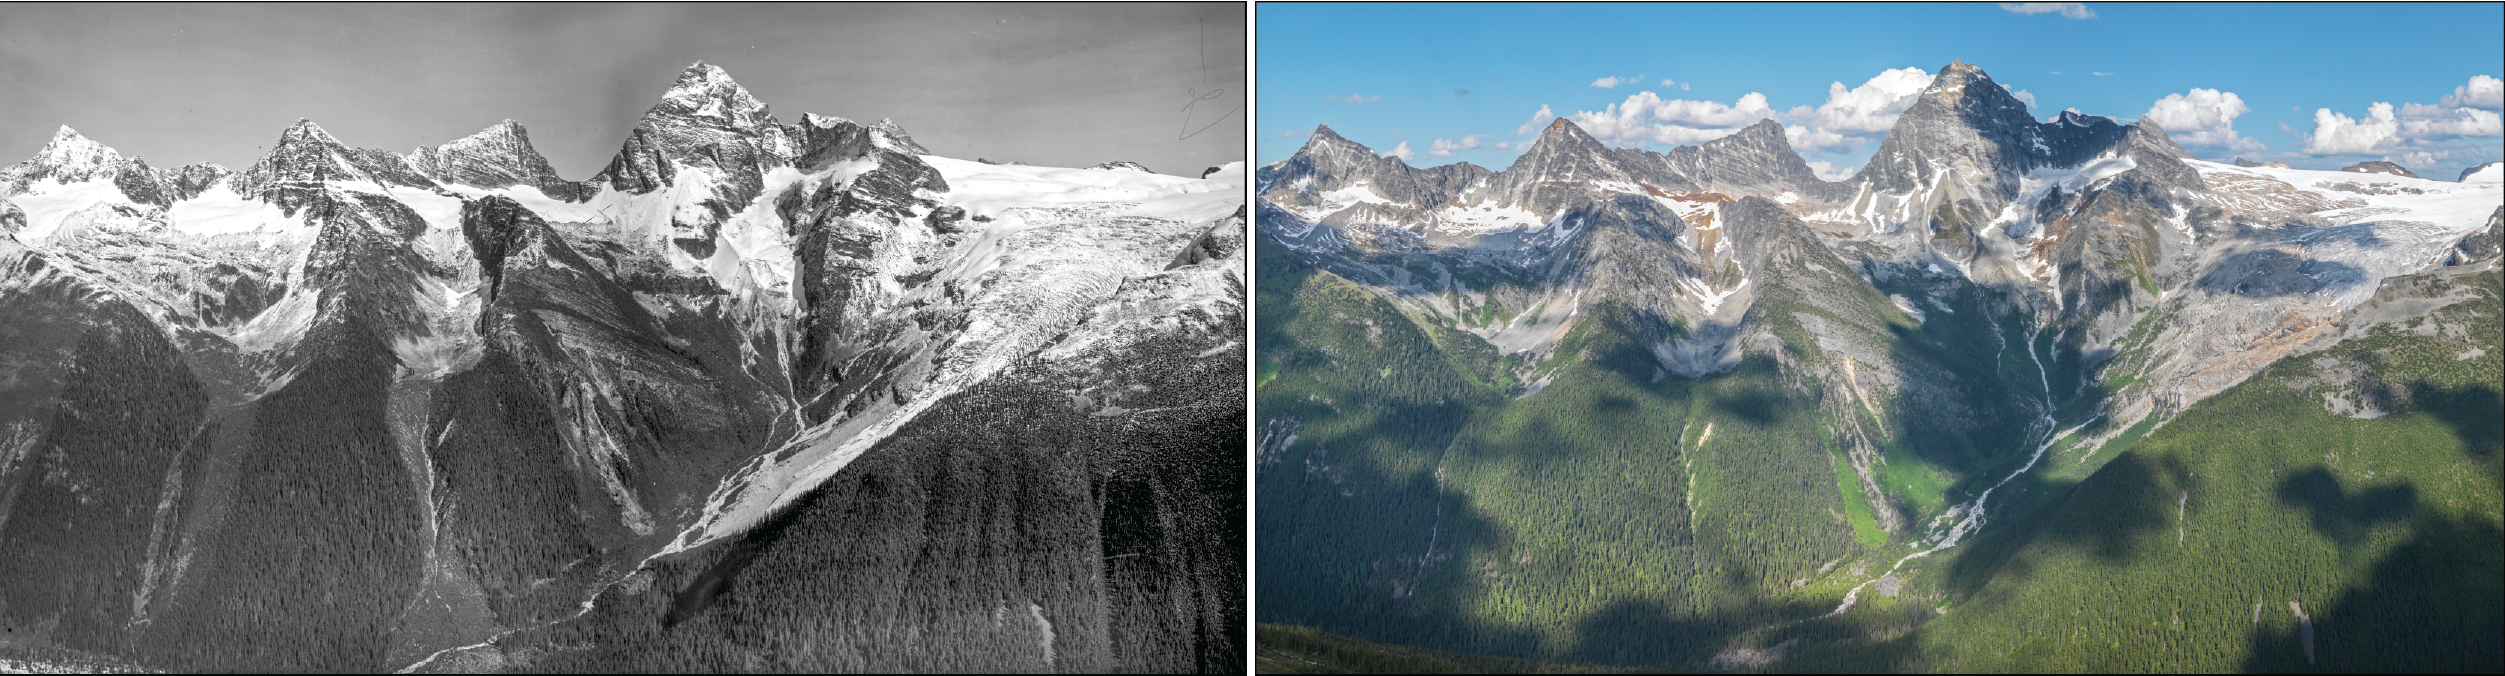 Mountain Legacy Images - Mountains In the Past & Now